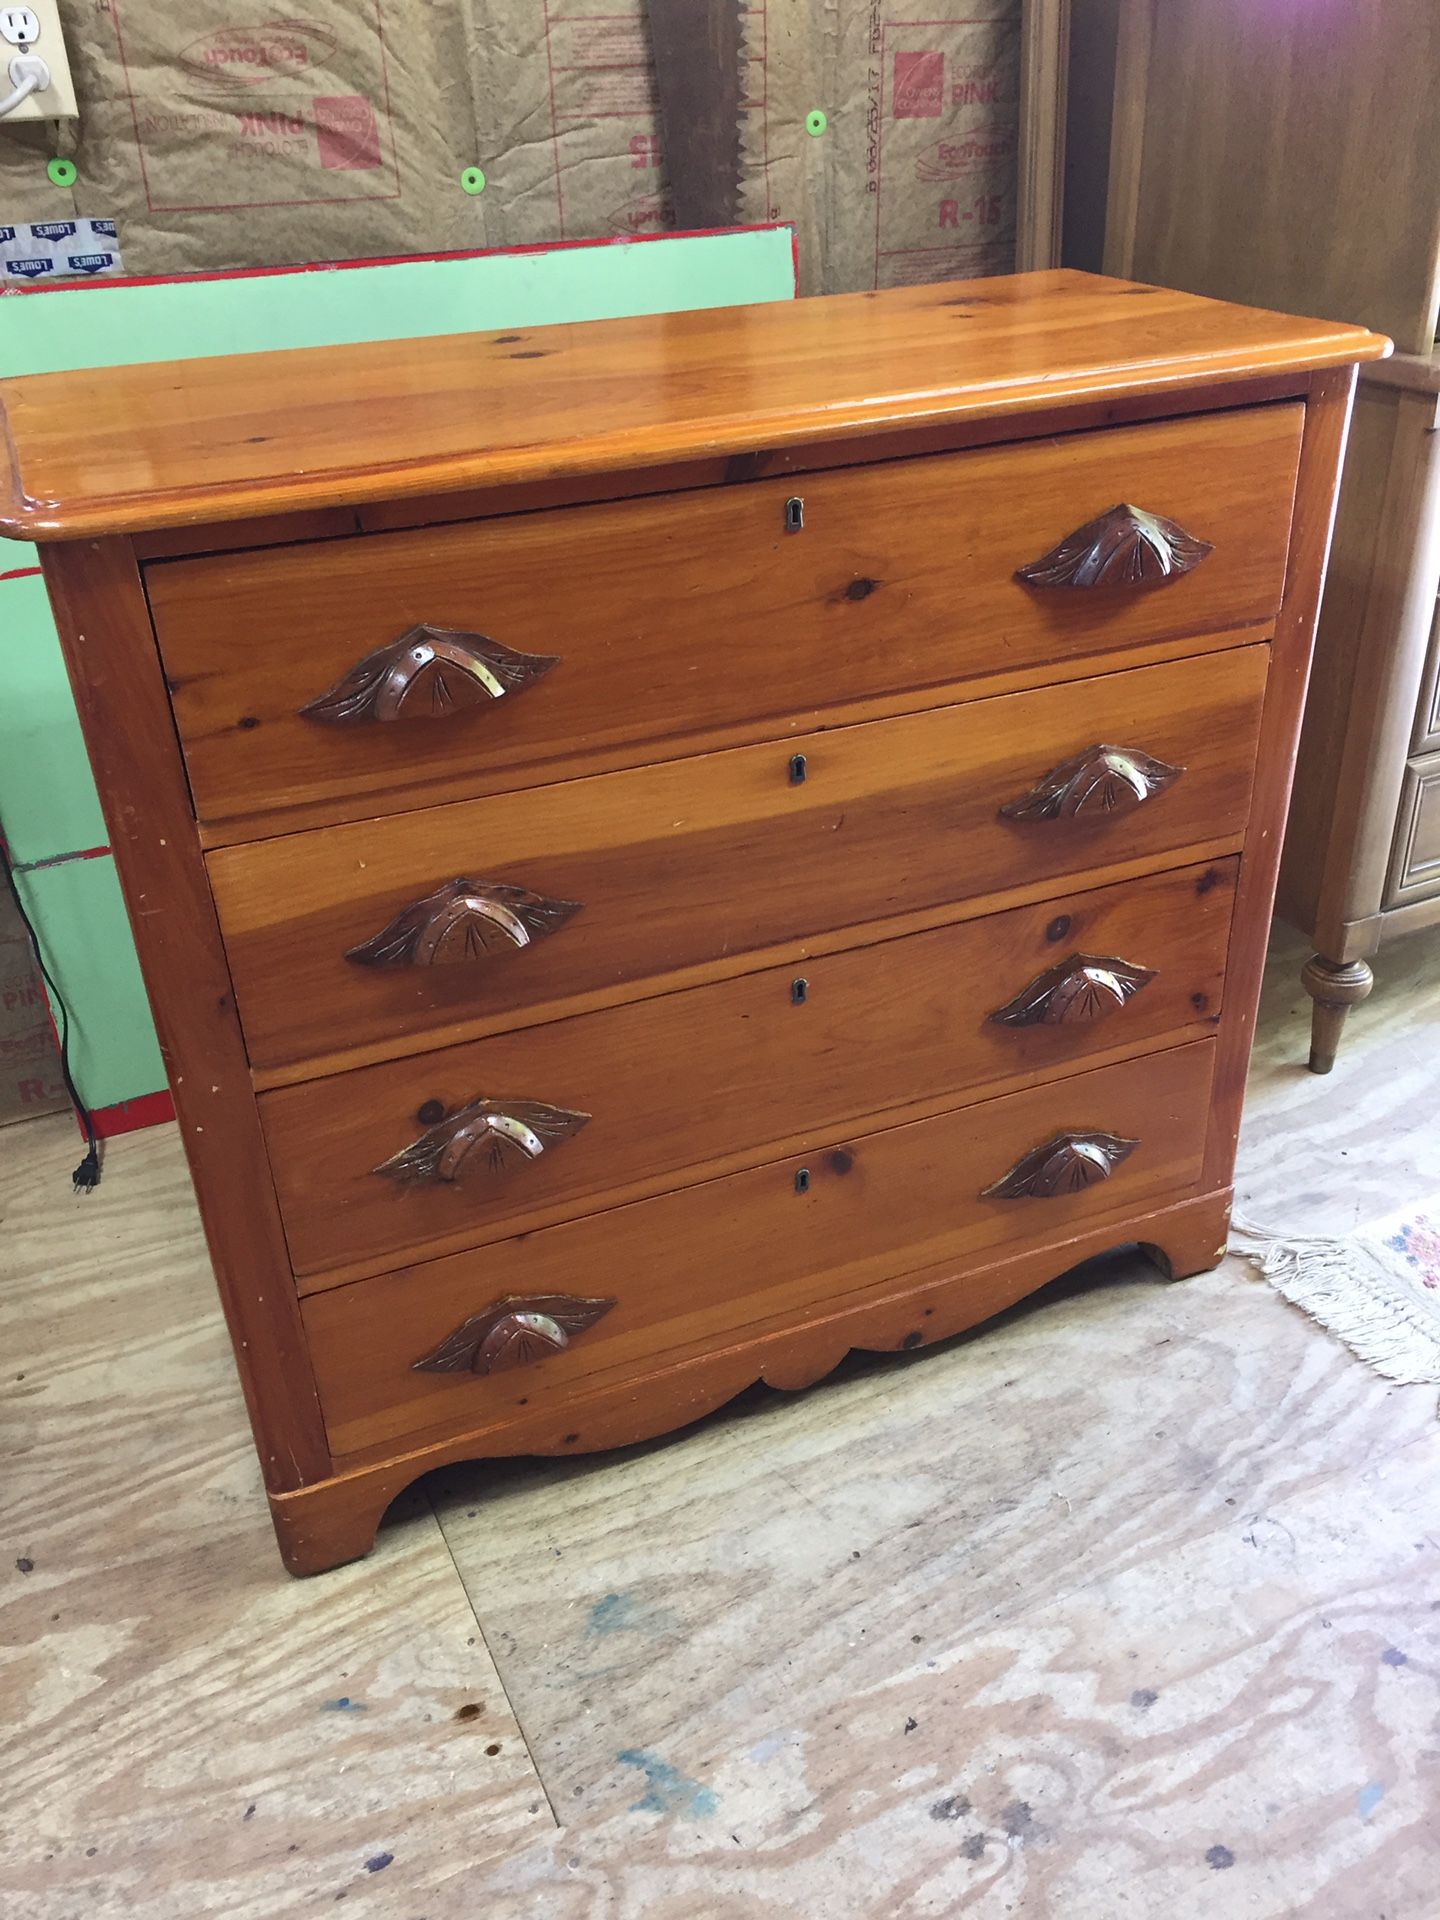 Nice Early 4drawer Pine Dresser w/wooden pulls,Beautiful Dovetail